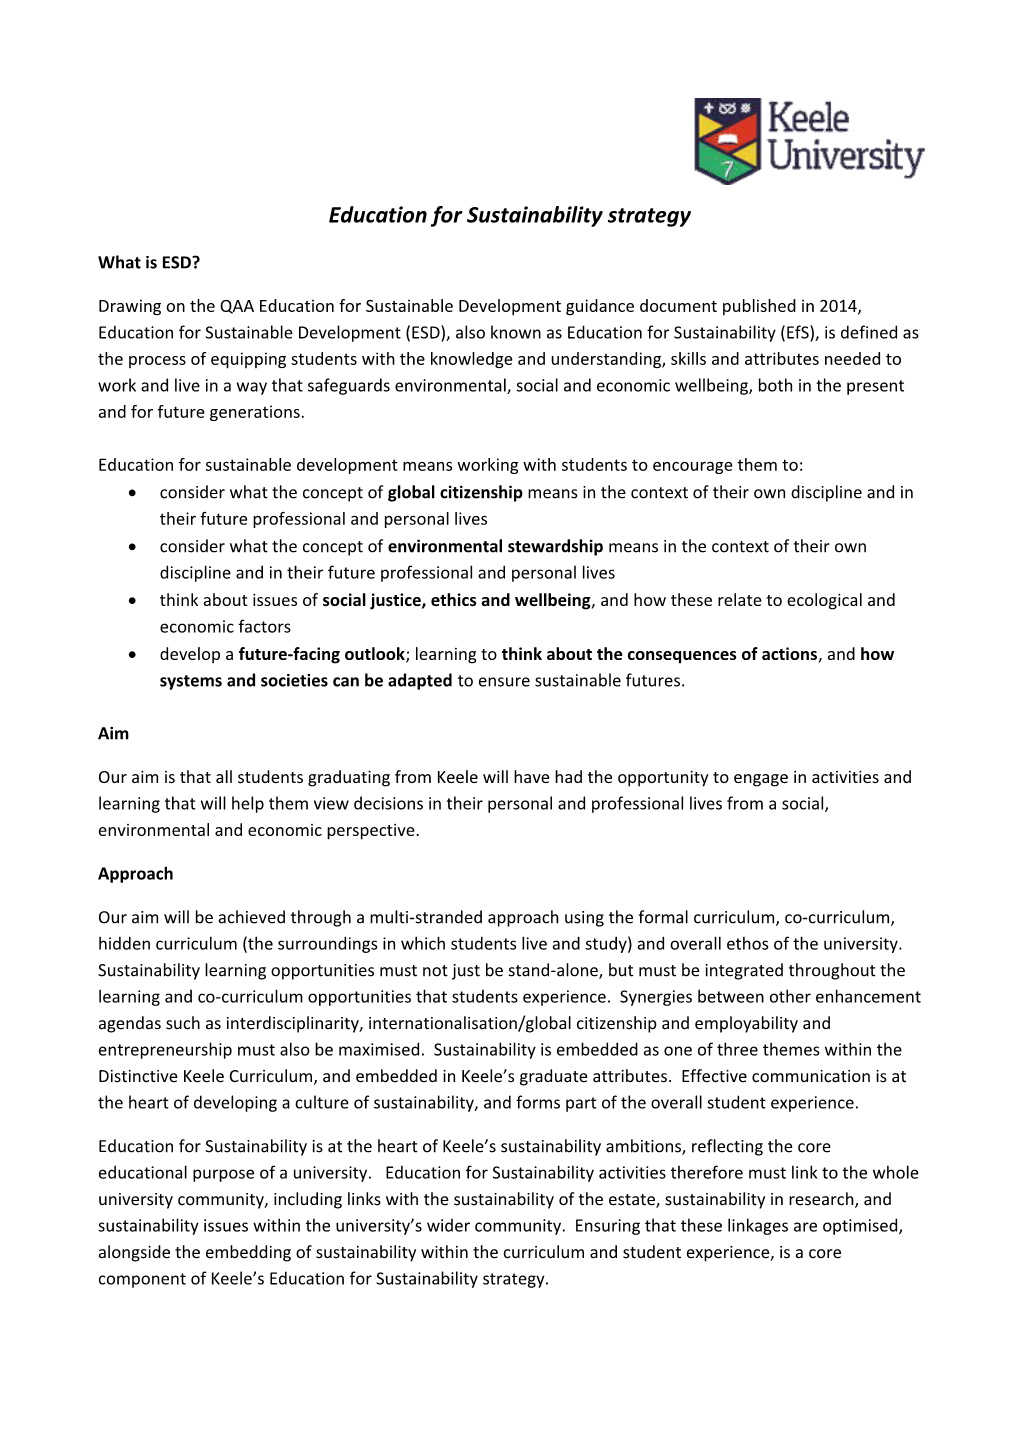 Education for Sustainability Strategy